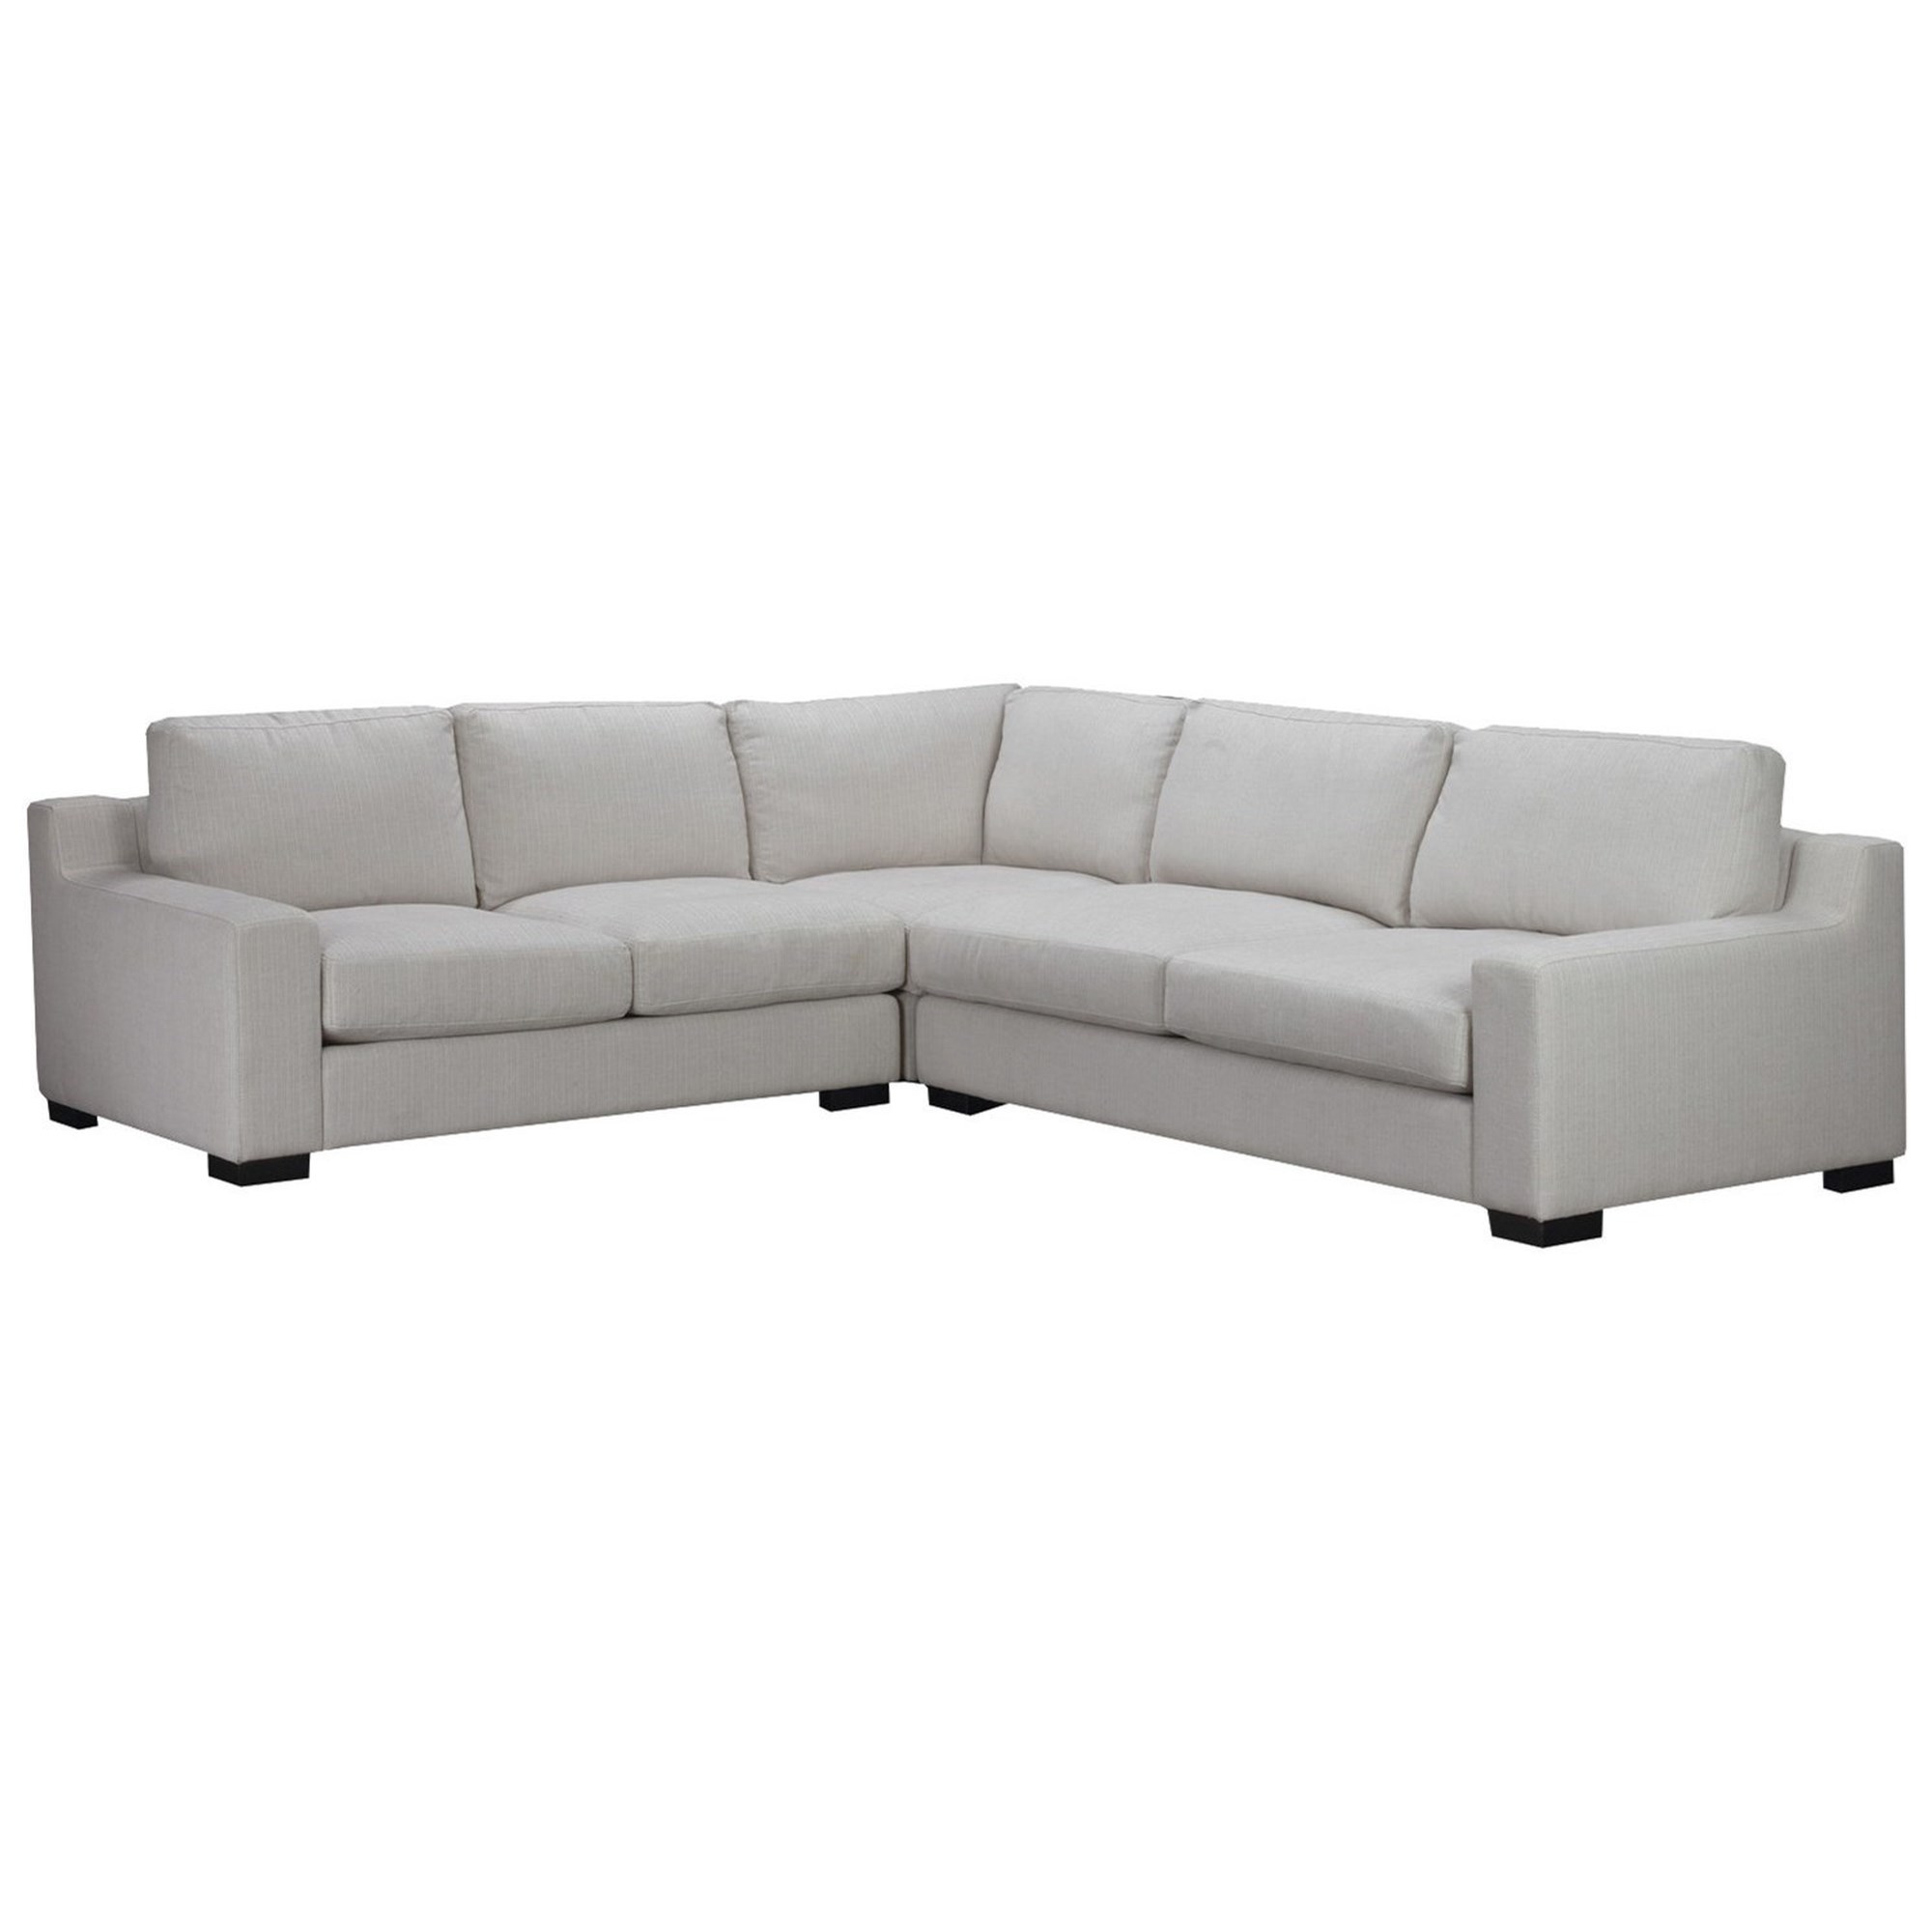 Brentwood Classics Athena 1403-55+56+64 Luxor Glacier 3 Piece Sectional ...